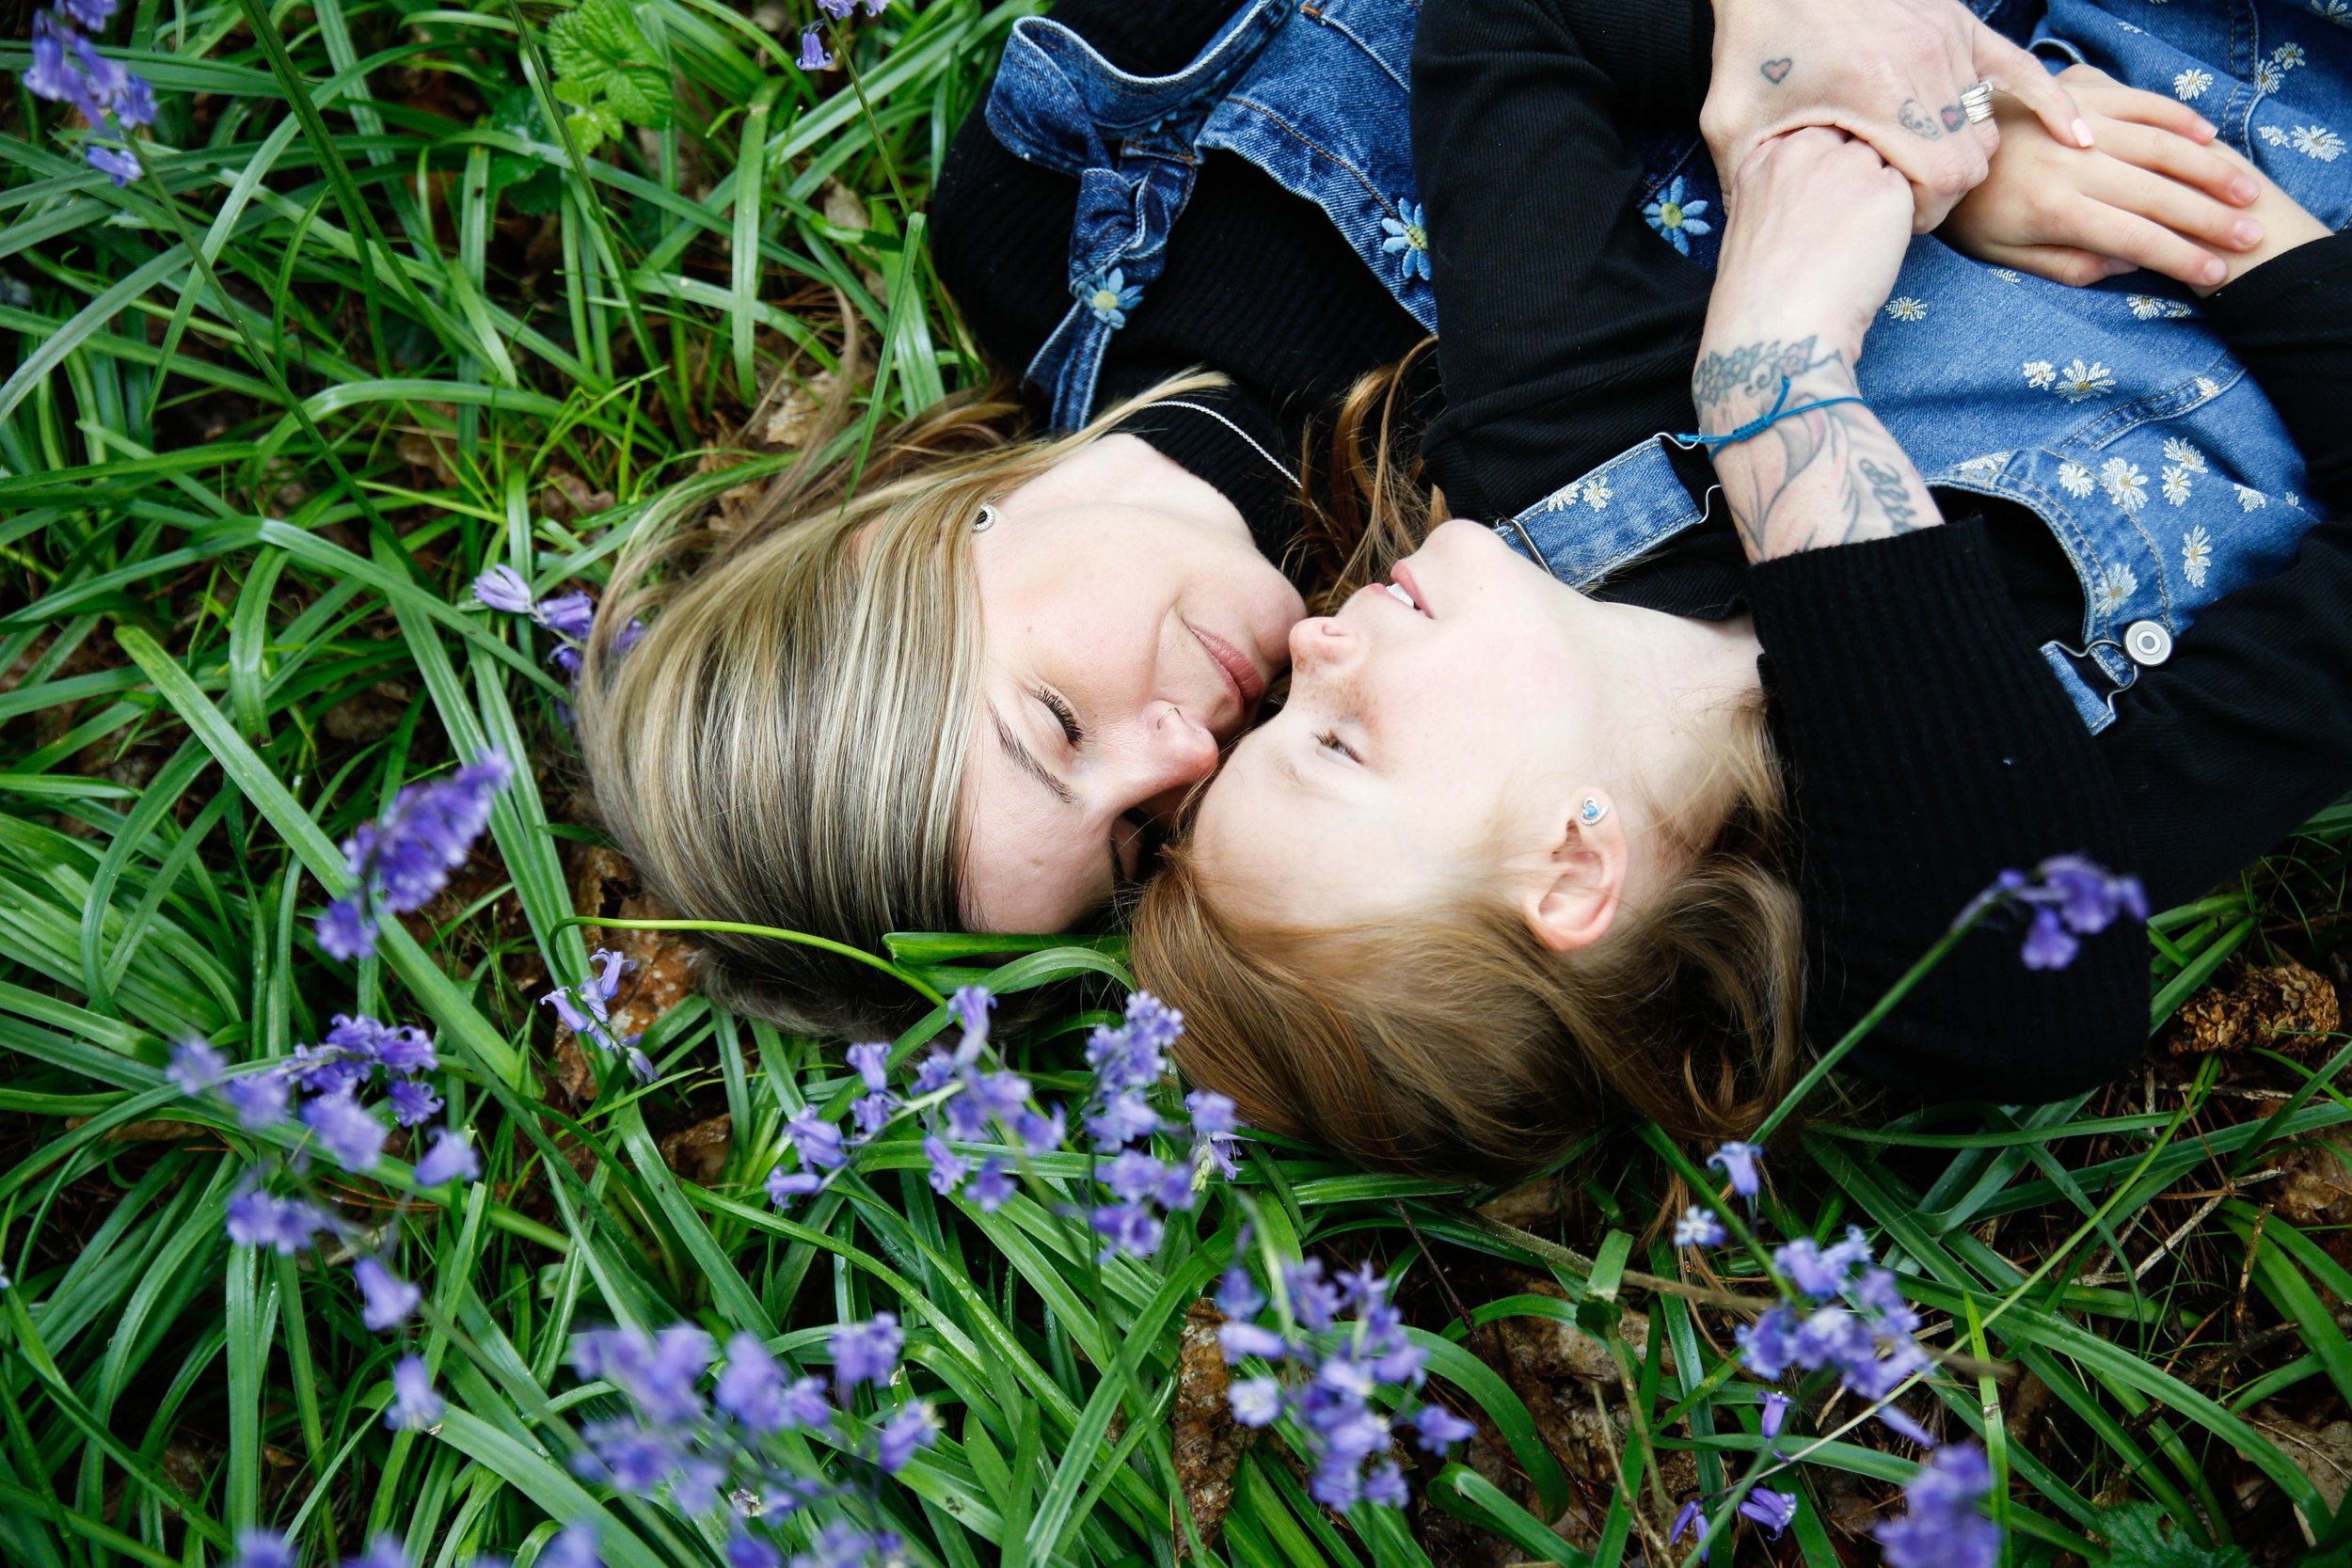 MUM AND DAUGHTER PHOTO SHOOT IN THE BLUEBELLS | BERKSHIRE PORTRAIT SHOOTS17 choice .JPG